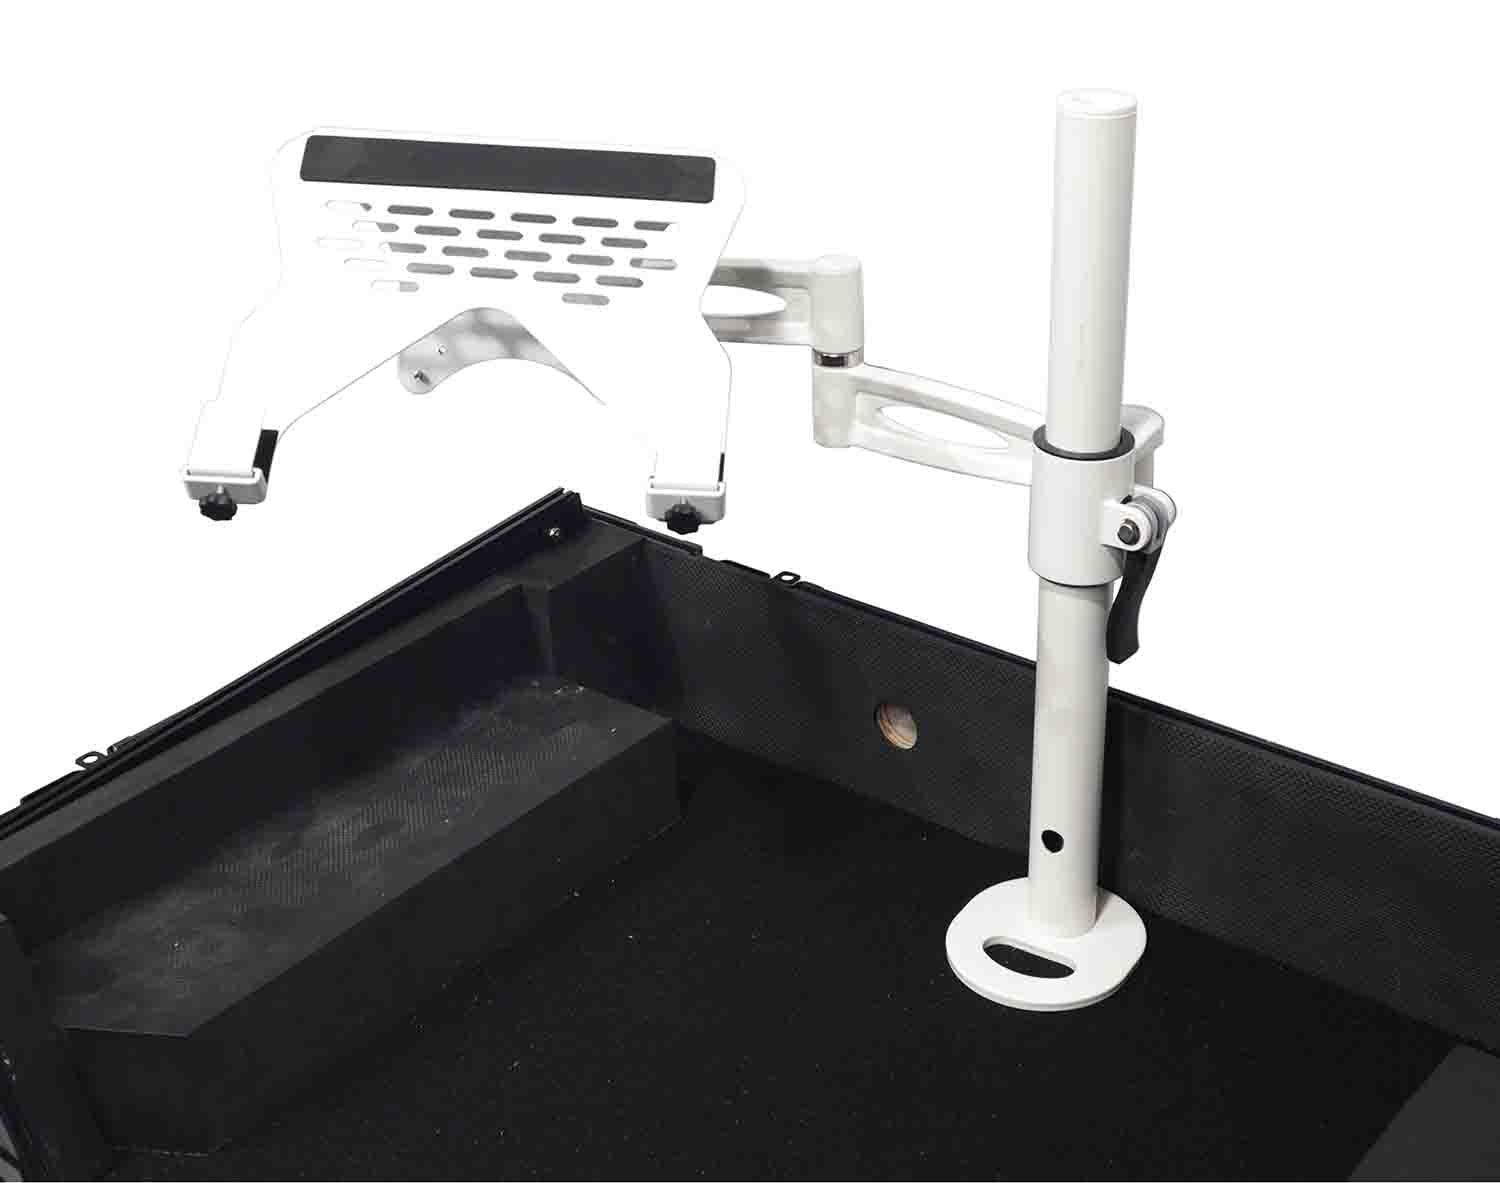 ProX XZF-LTARM PKG WH, Articulating Laptop Tray Arm with Shelf and Pole for Control Tower - White Finish